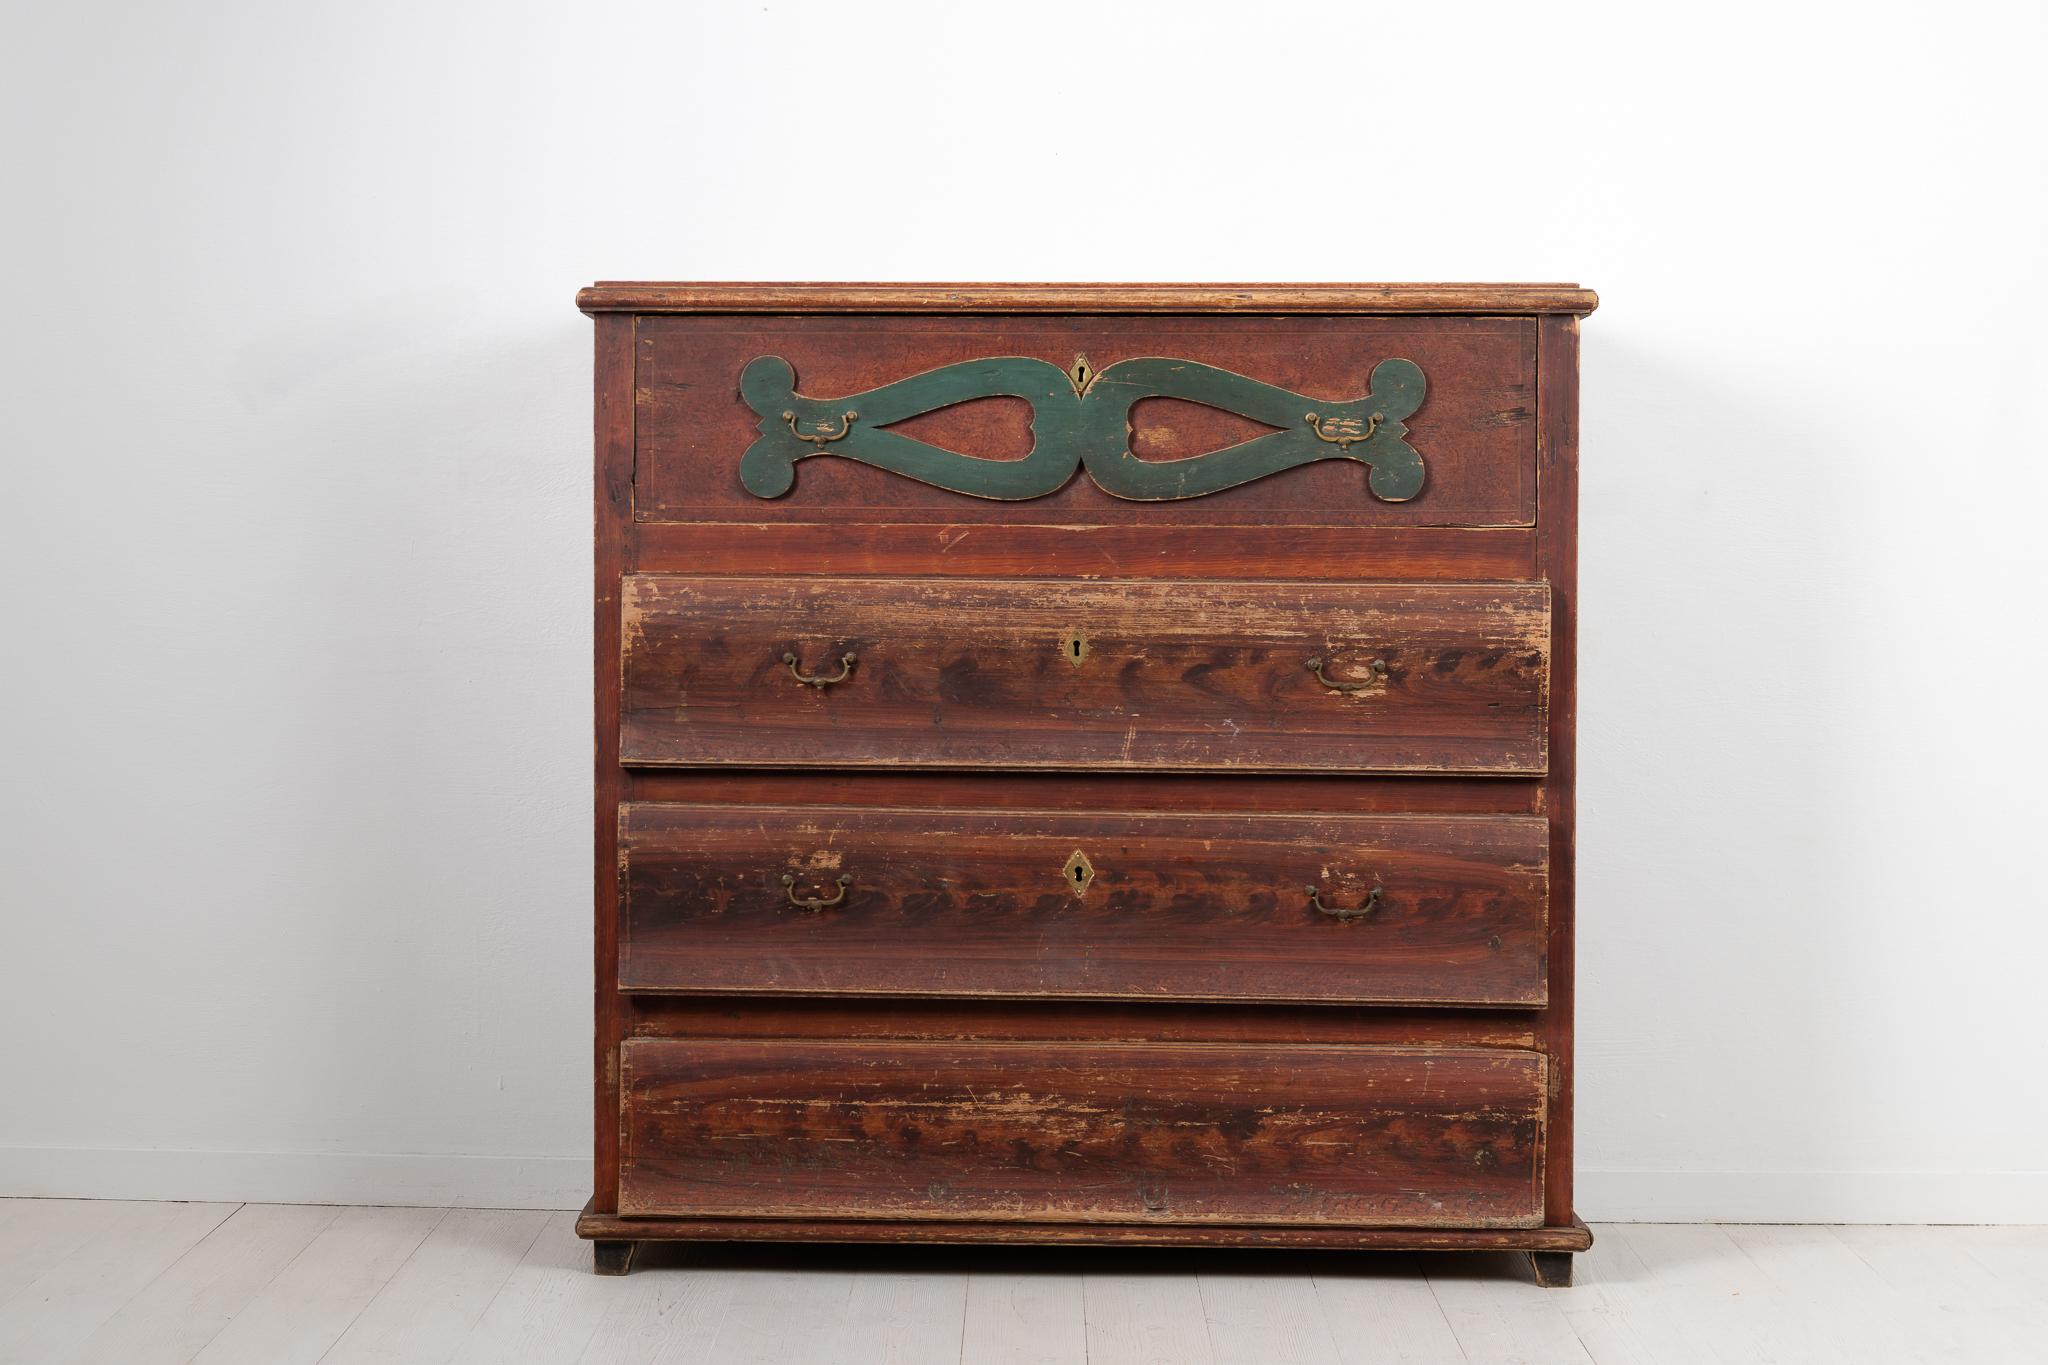 Country chest of drawers from Northern Sweden made around 1810 to 1820. The chest is pine with untouched original paint and authentic patina. The paint is distressed with signs of wear after 200 years of use. Original hardware in brass. The bottom